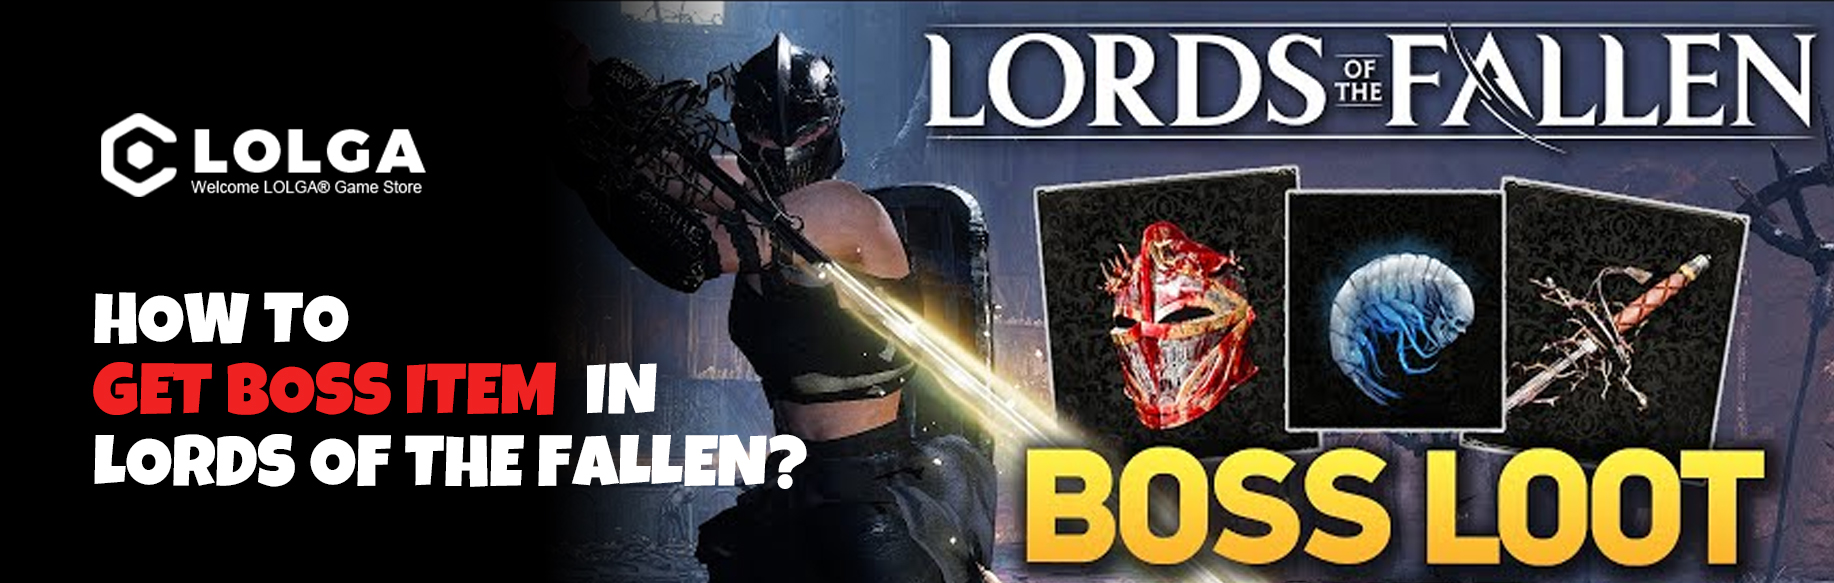  How to Get Boss Item  in Lords of the Fallen?